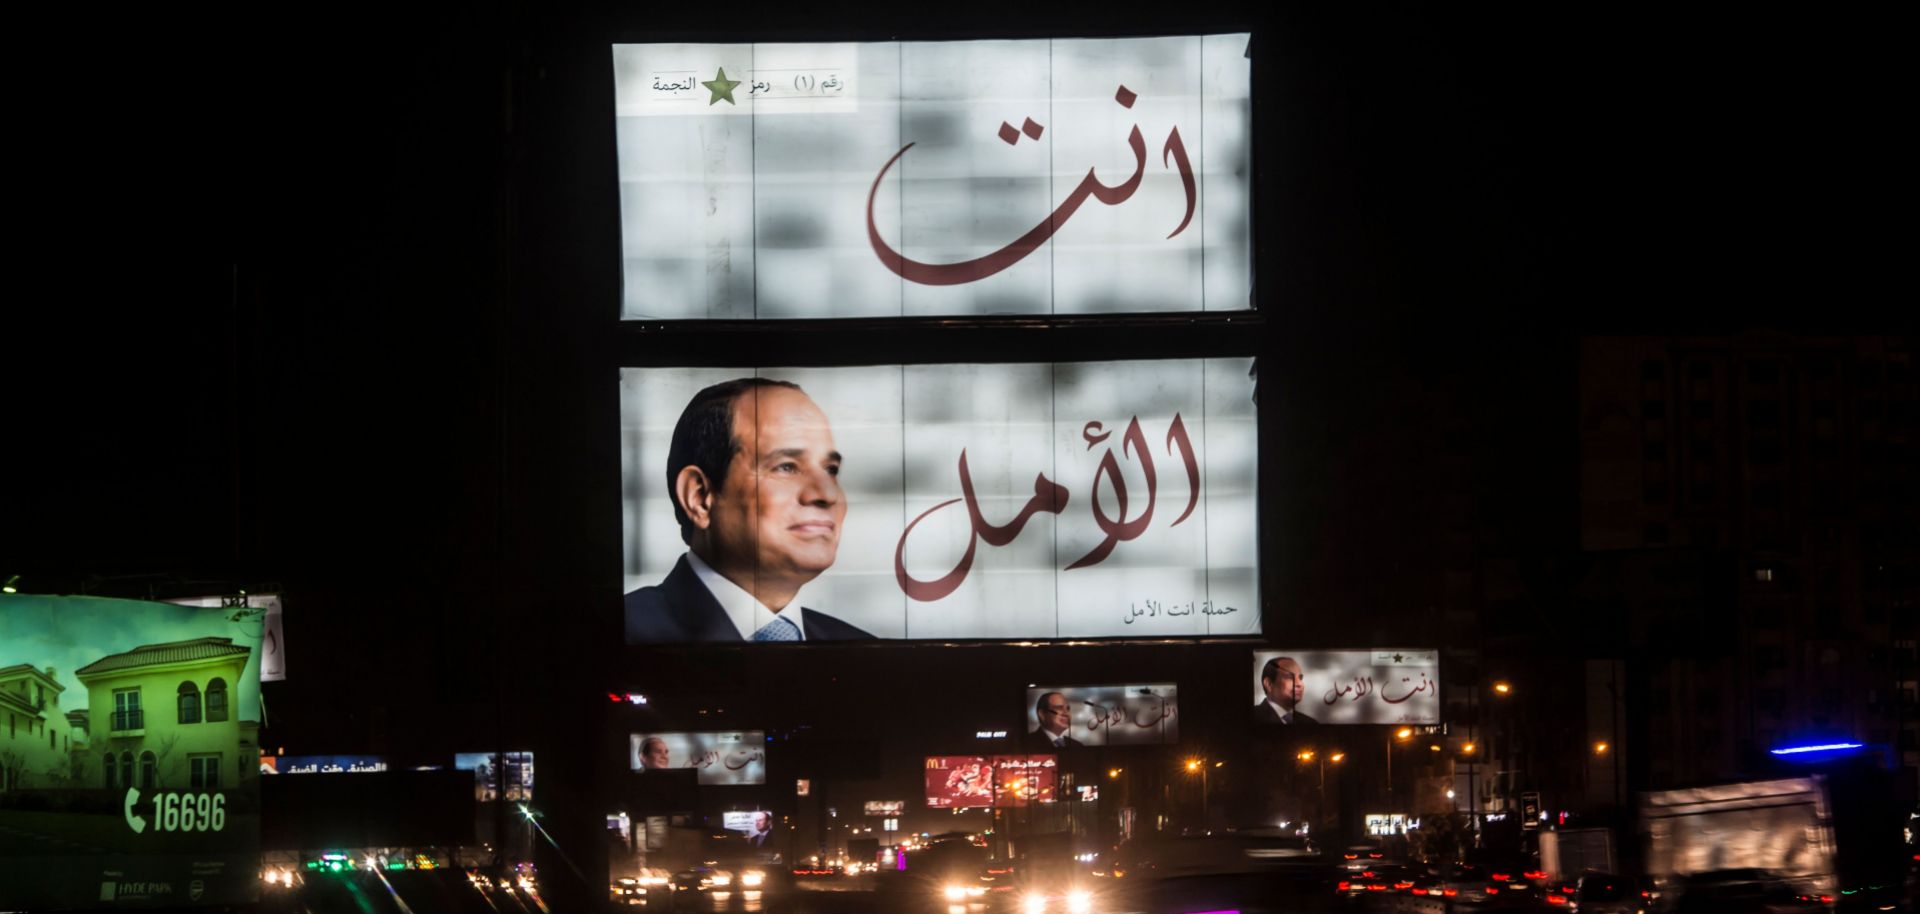 A campaign sign in Cairo expresses support for incumbent President Abdel Fattah al-Sisi, whose victory in Egypt's March 26-28 presidential election is all but assured.